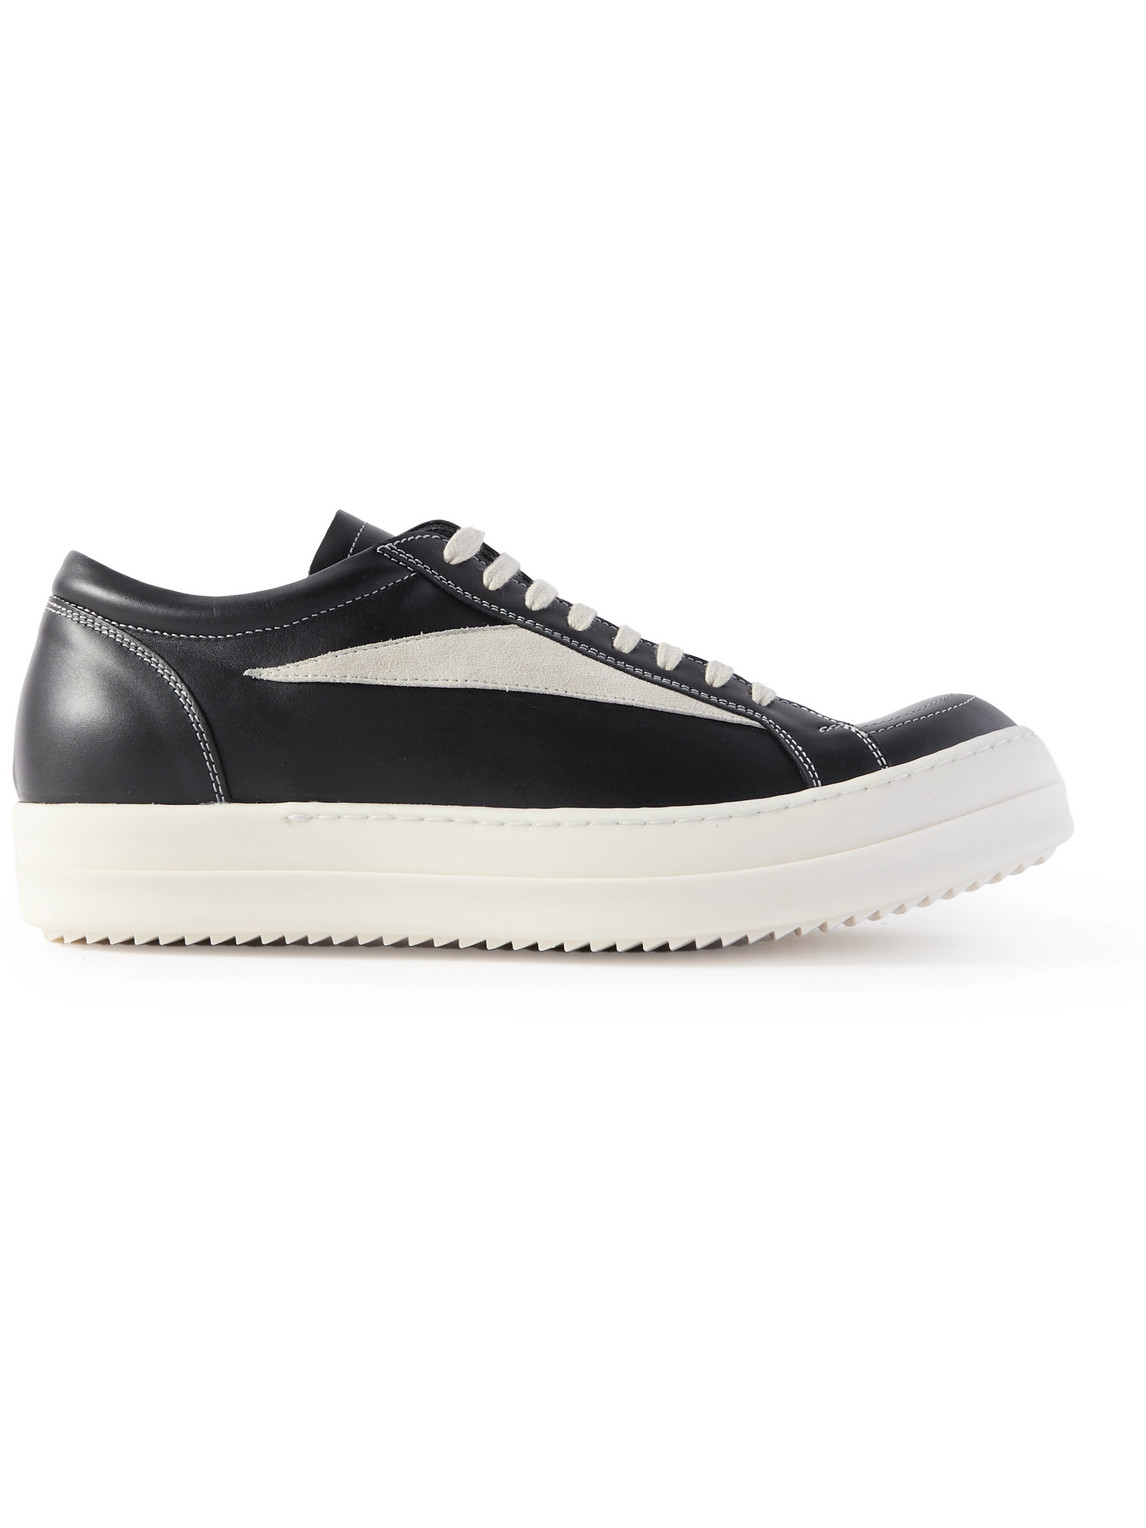 RICK OWENS SUEDE-TRIMMED LEATHER SNEAKERS